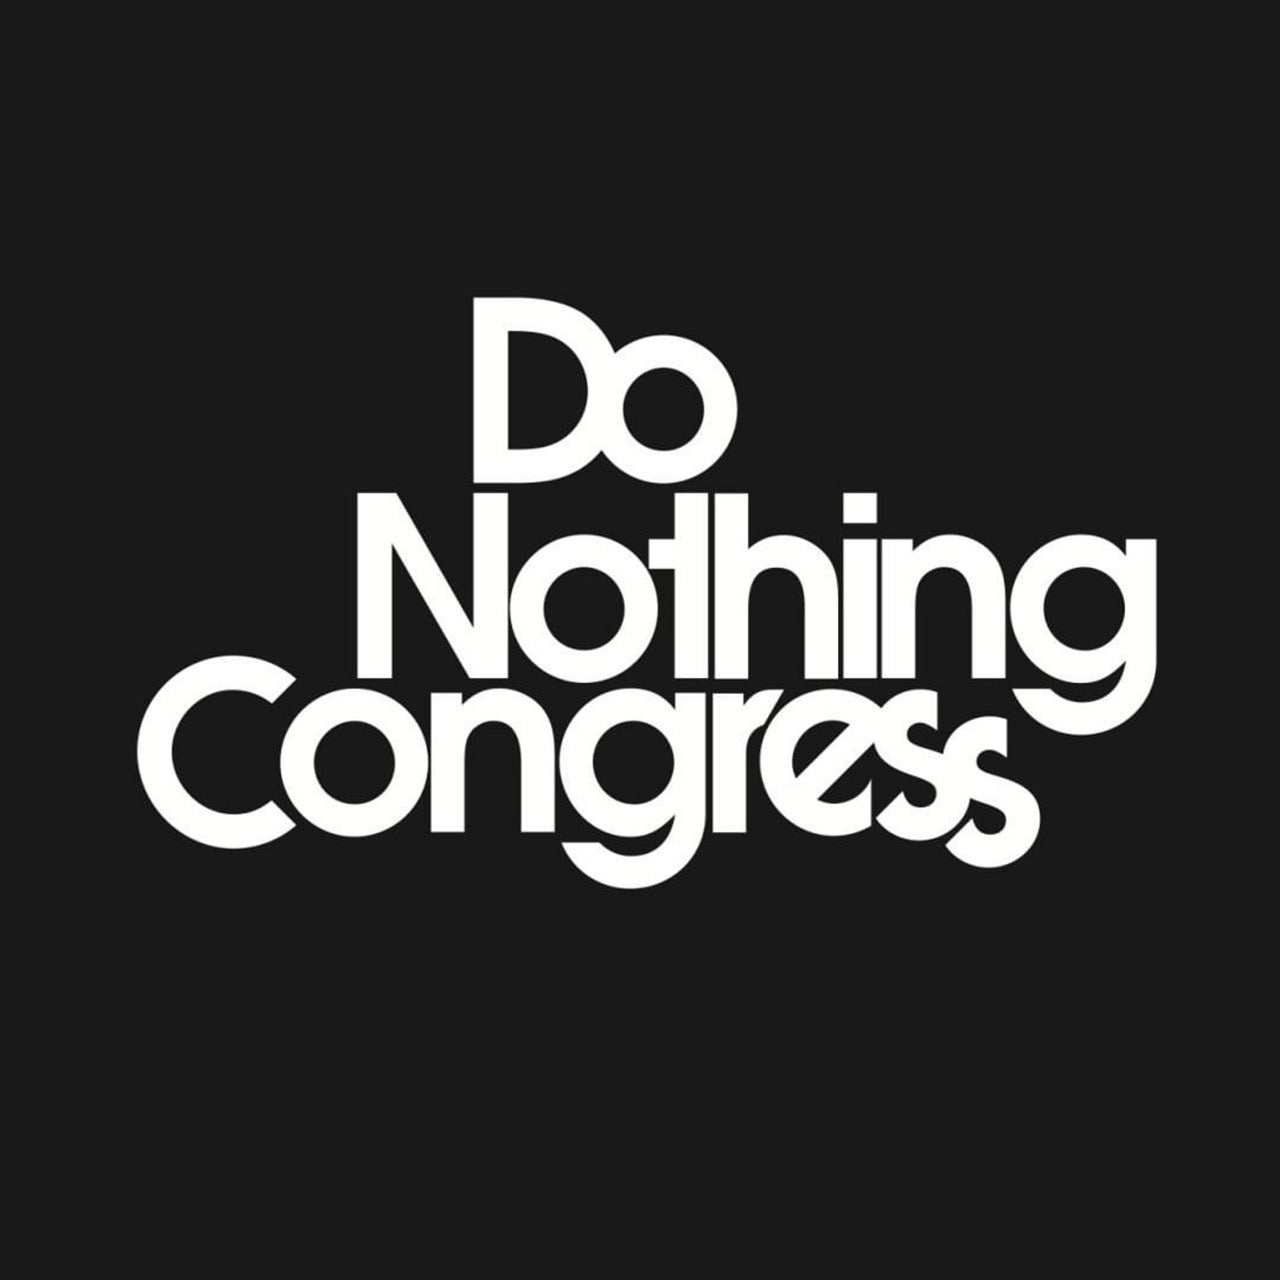 [ FINAL ONE ! ] Do Nothing Congress T-SHIRTS " Lunch on the grass Manet "  / Do Nothing Congress